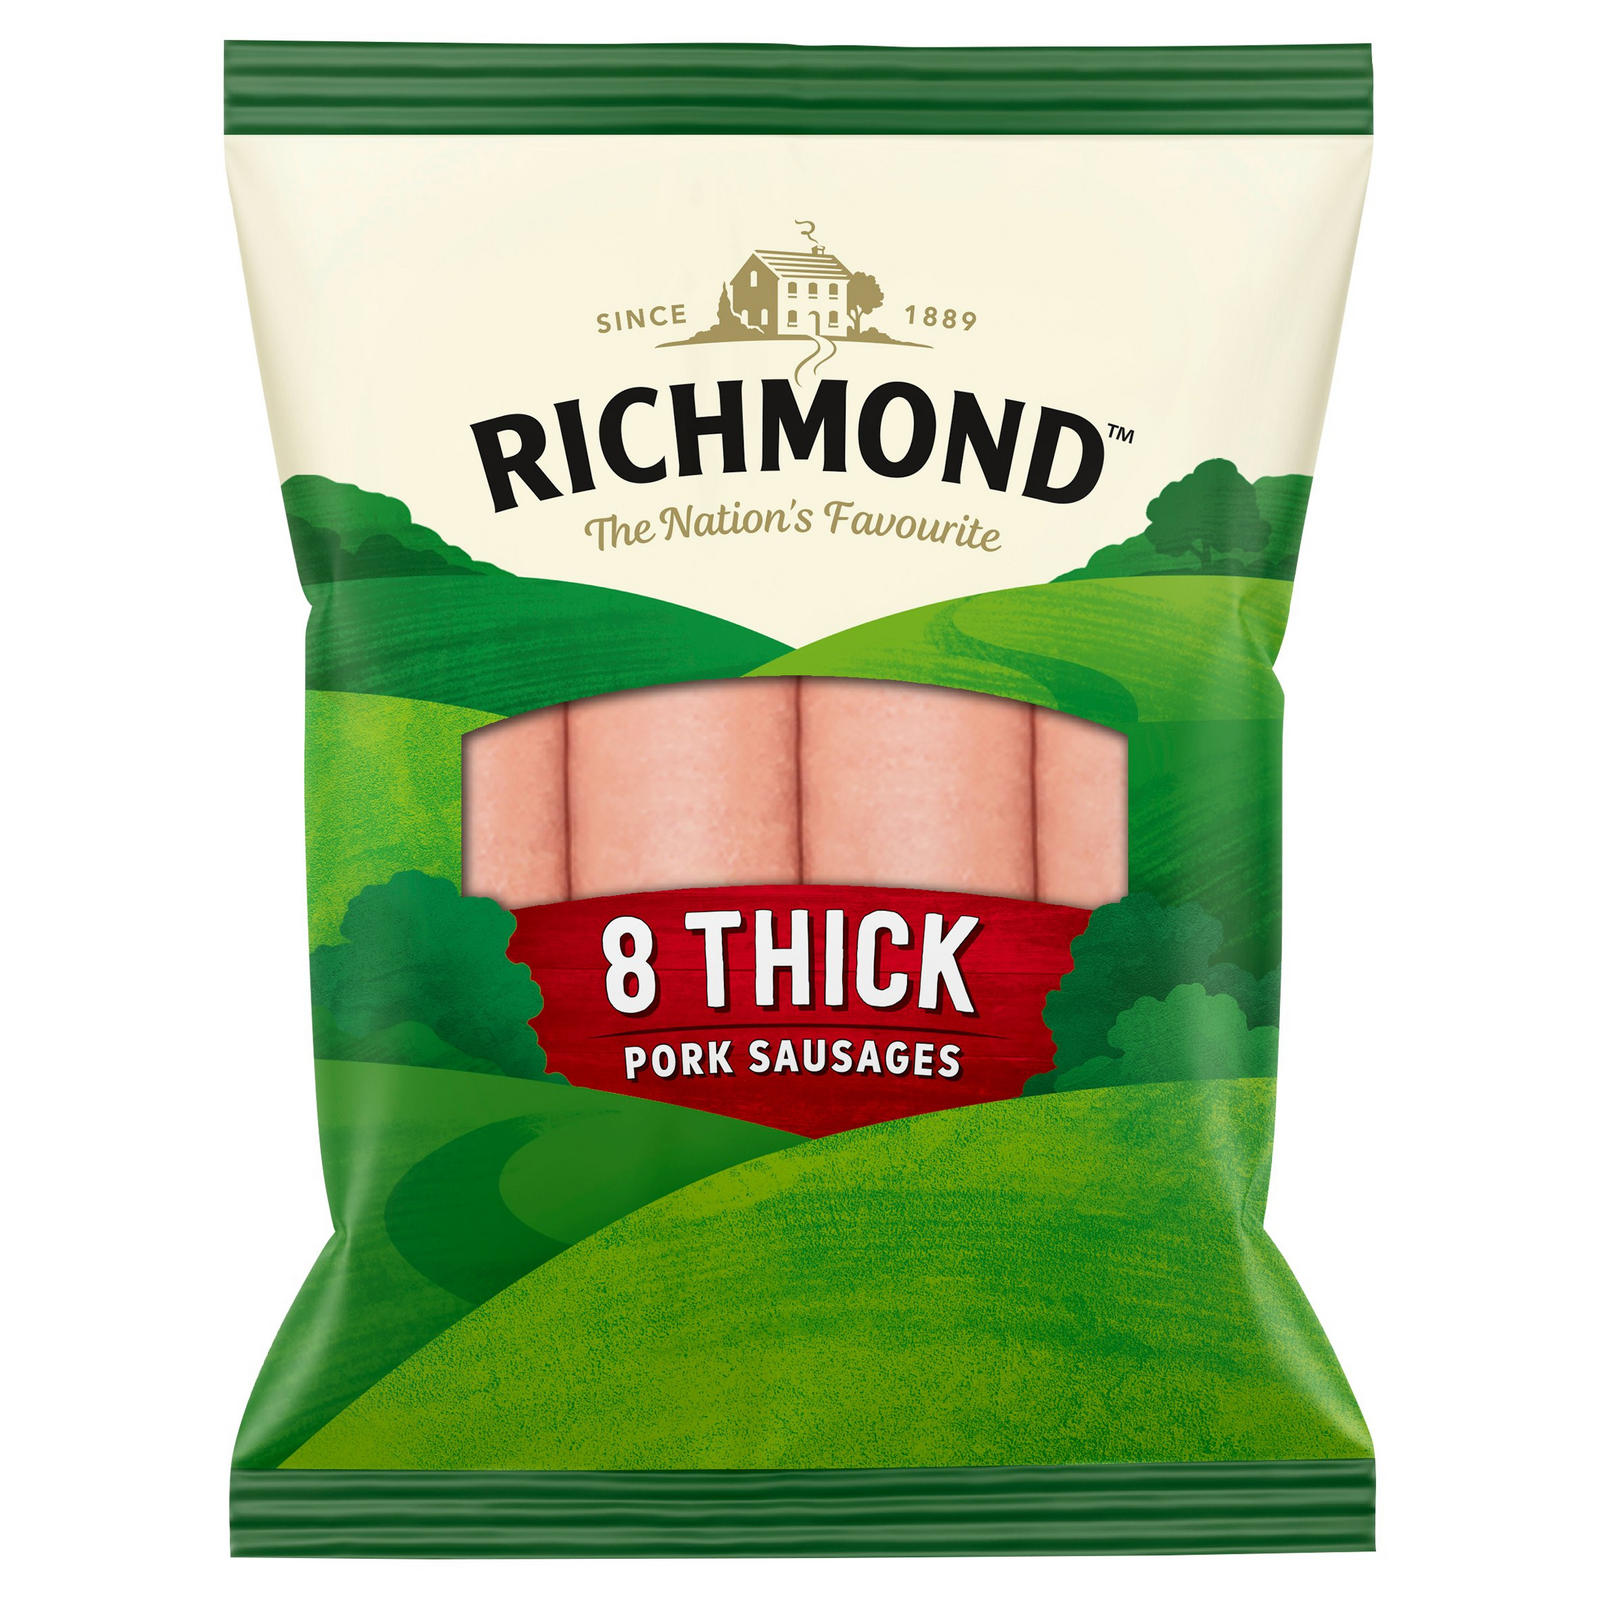 Richmond 8 Thick Pork Sausages 410G | Sausages | Iceland Foods